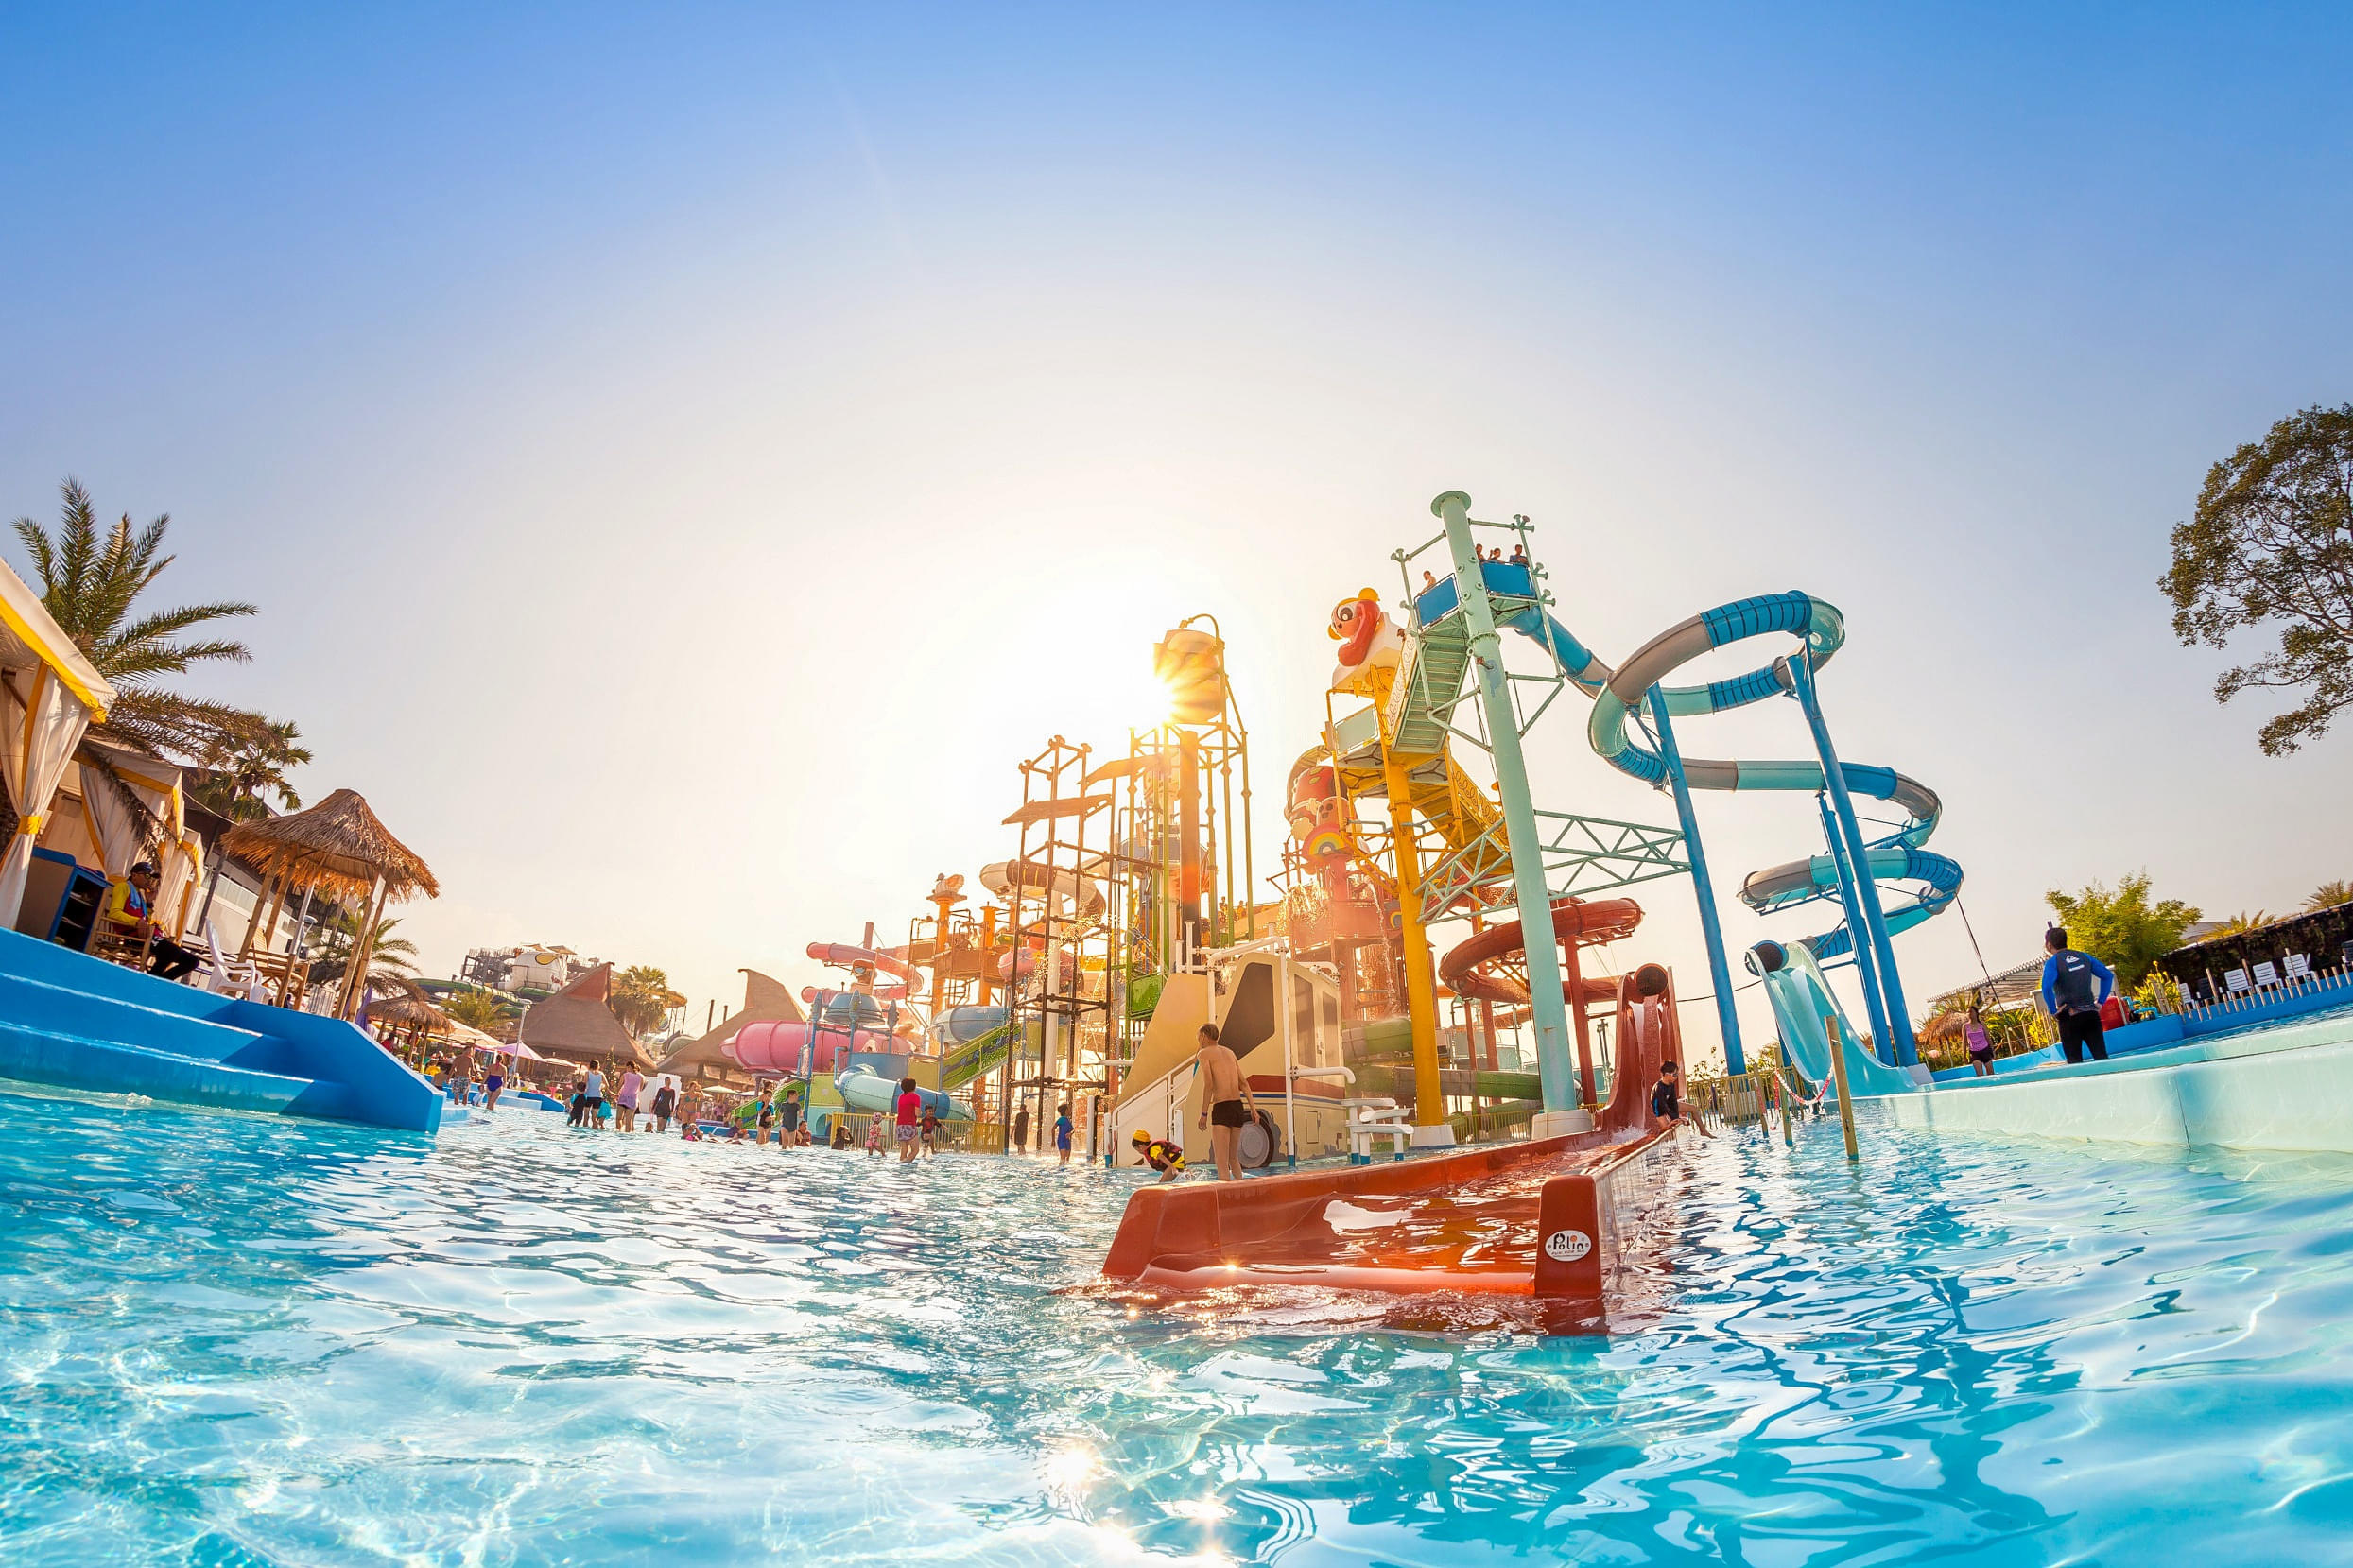 Amaazia Waterpark Overview